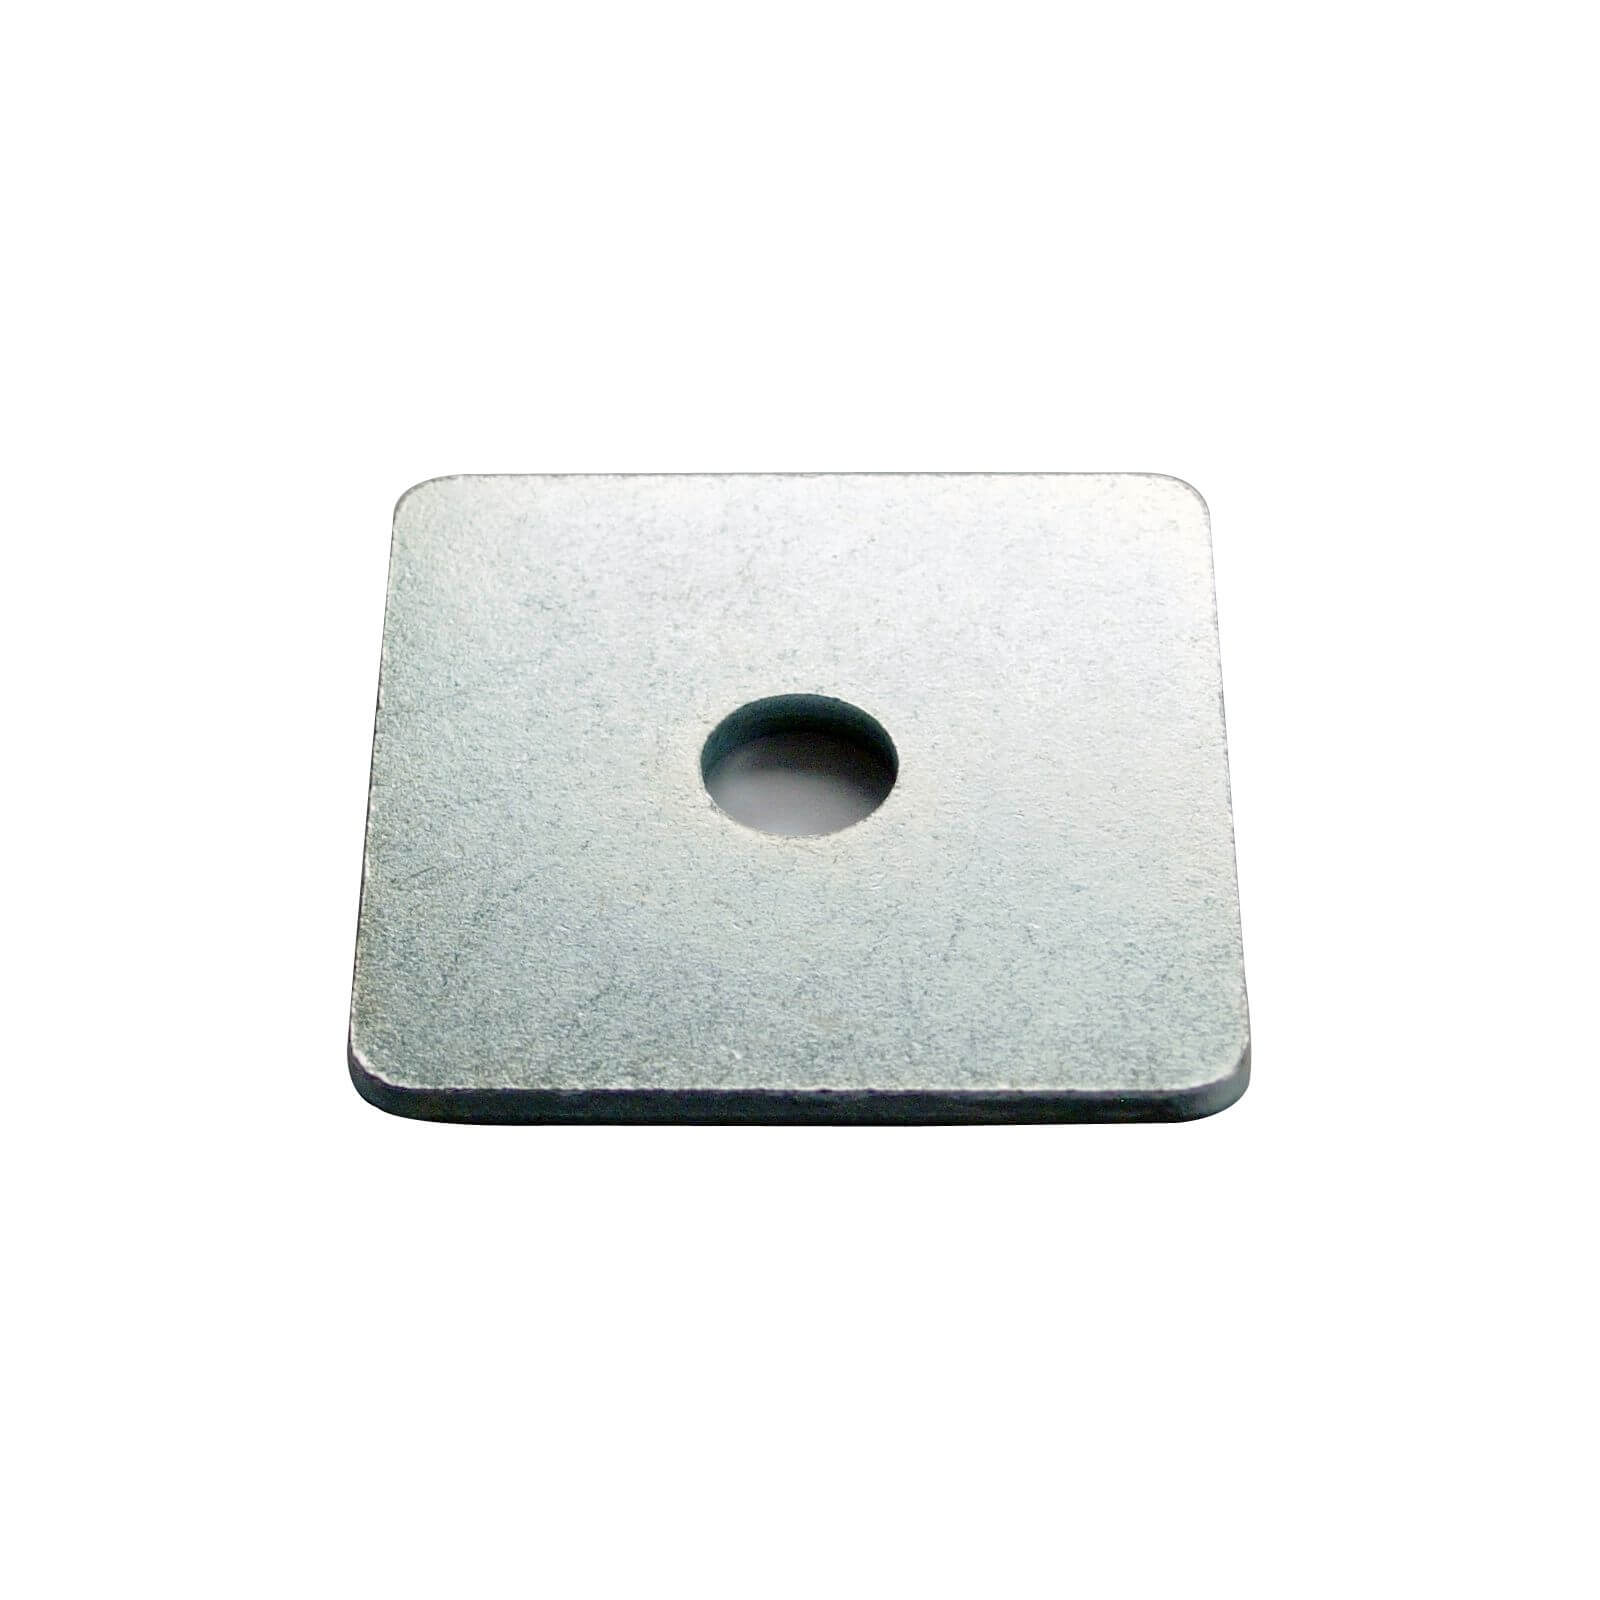 Square Plated Wasther - Bright Zinc Plated - (10 -50mm) - 4 Pack